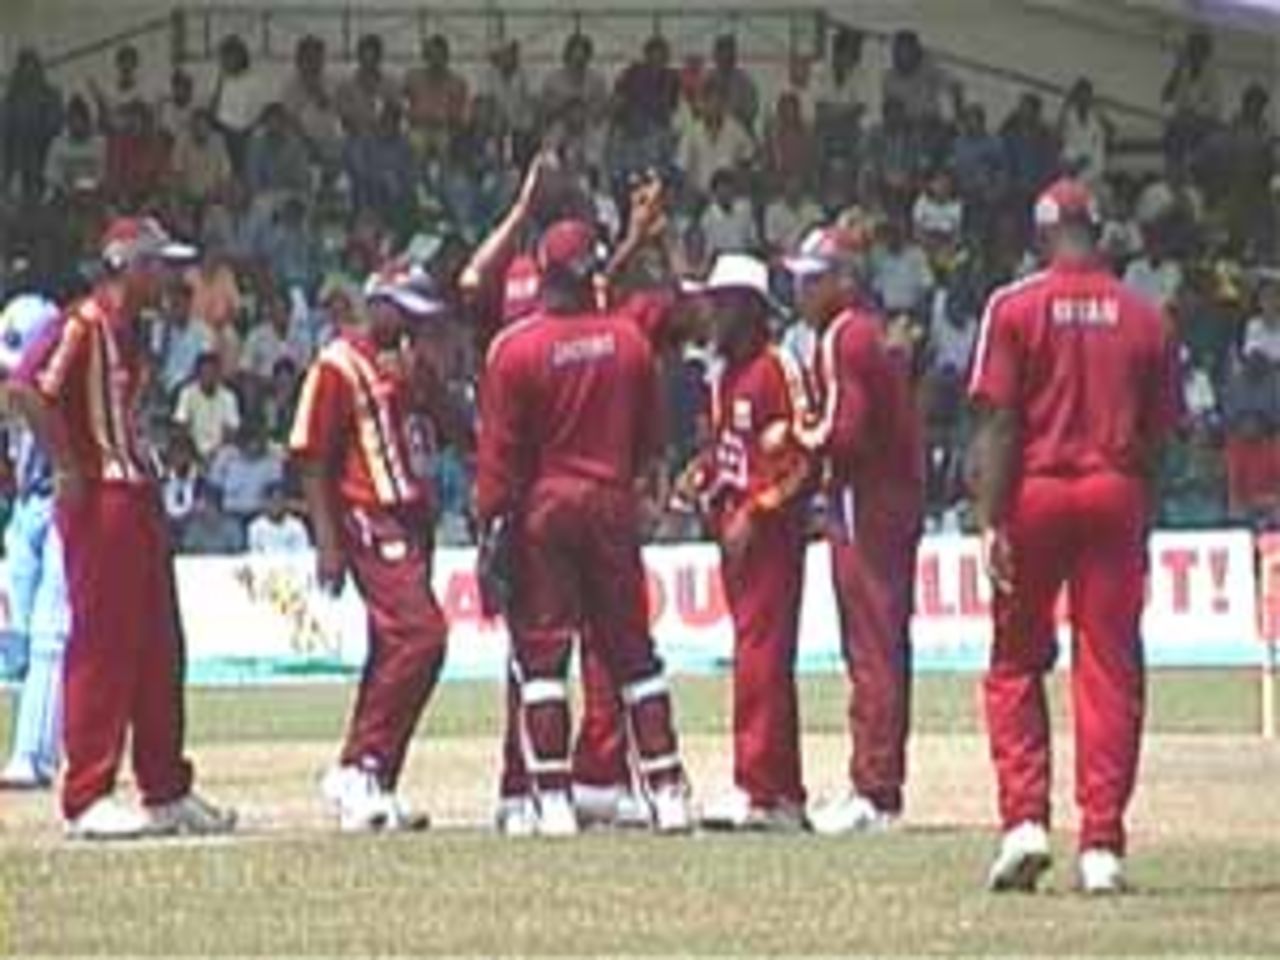 West Indians celebrate after picking up the crucial wicket of Tendulkar, India v West Indies (Final), Coca-Cola Singapore Challenge, 1999-2000, Kallang Ground, Singapore, 7 Sep 1999.